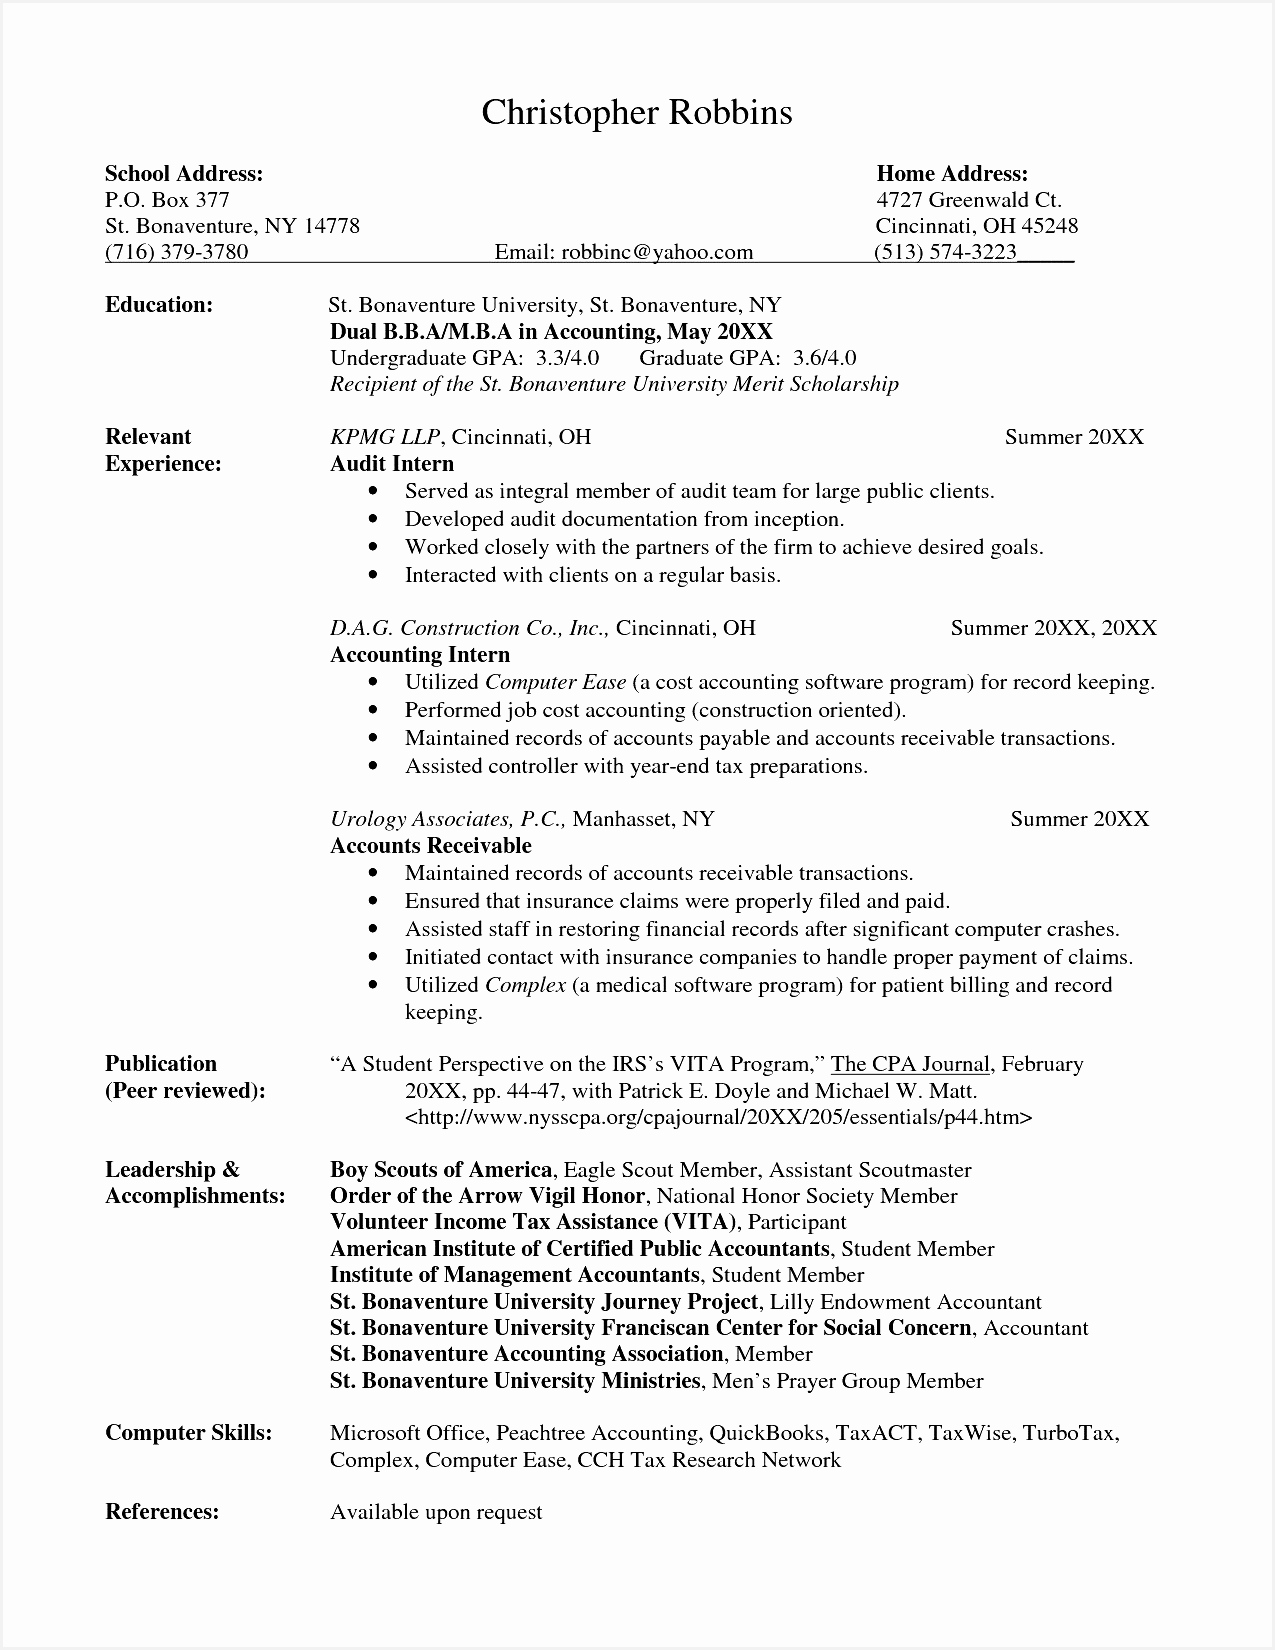 Resume For Accounting Internship Updated Unique Resume Sample Doc Best Resume Doc 0d Resume Sample Doc16501275